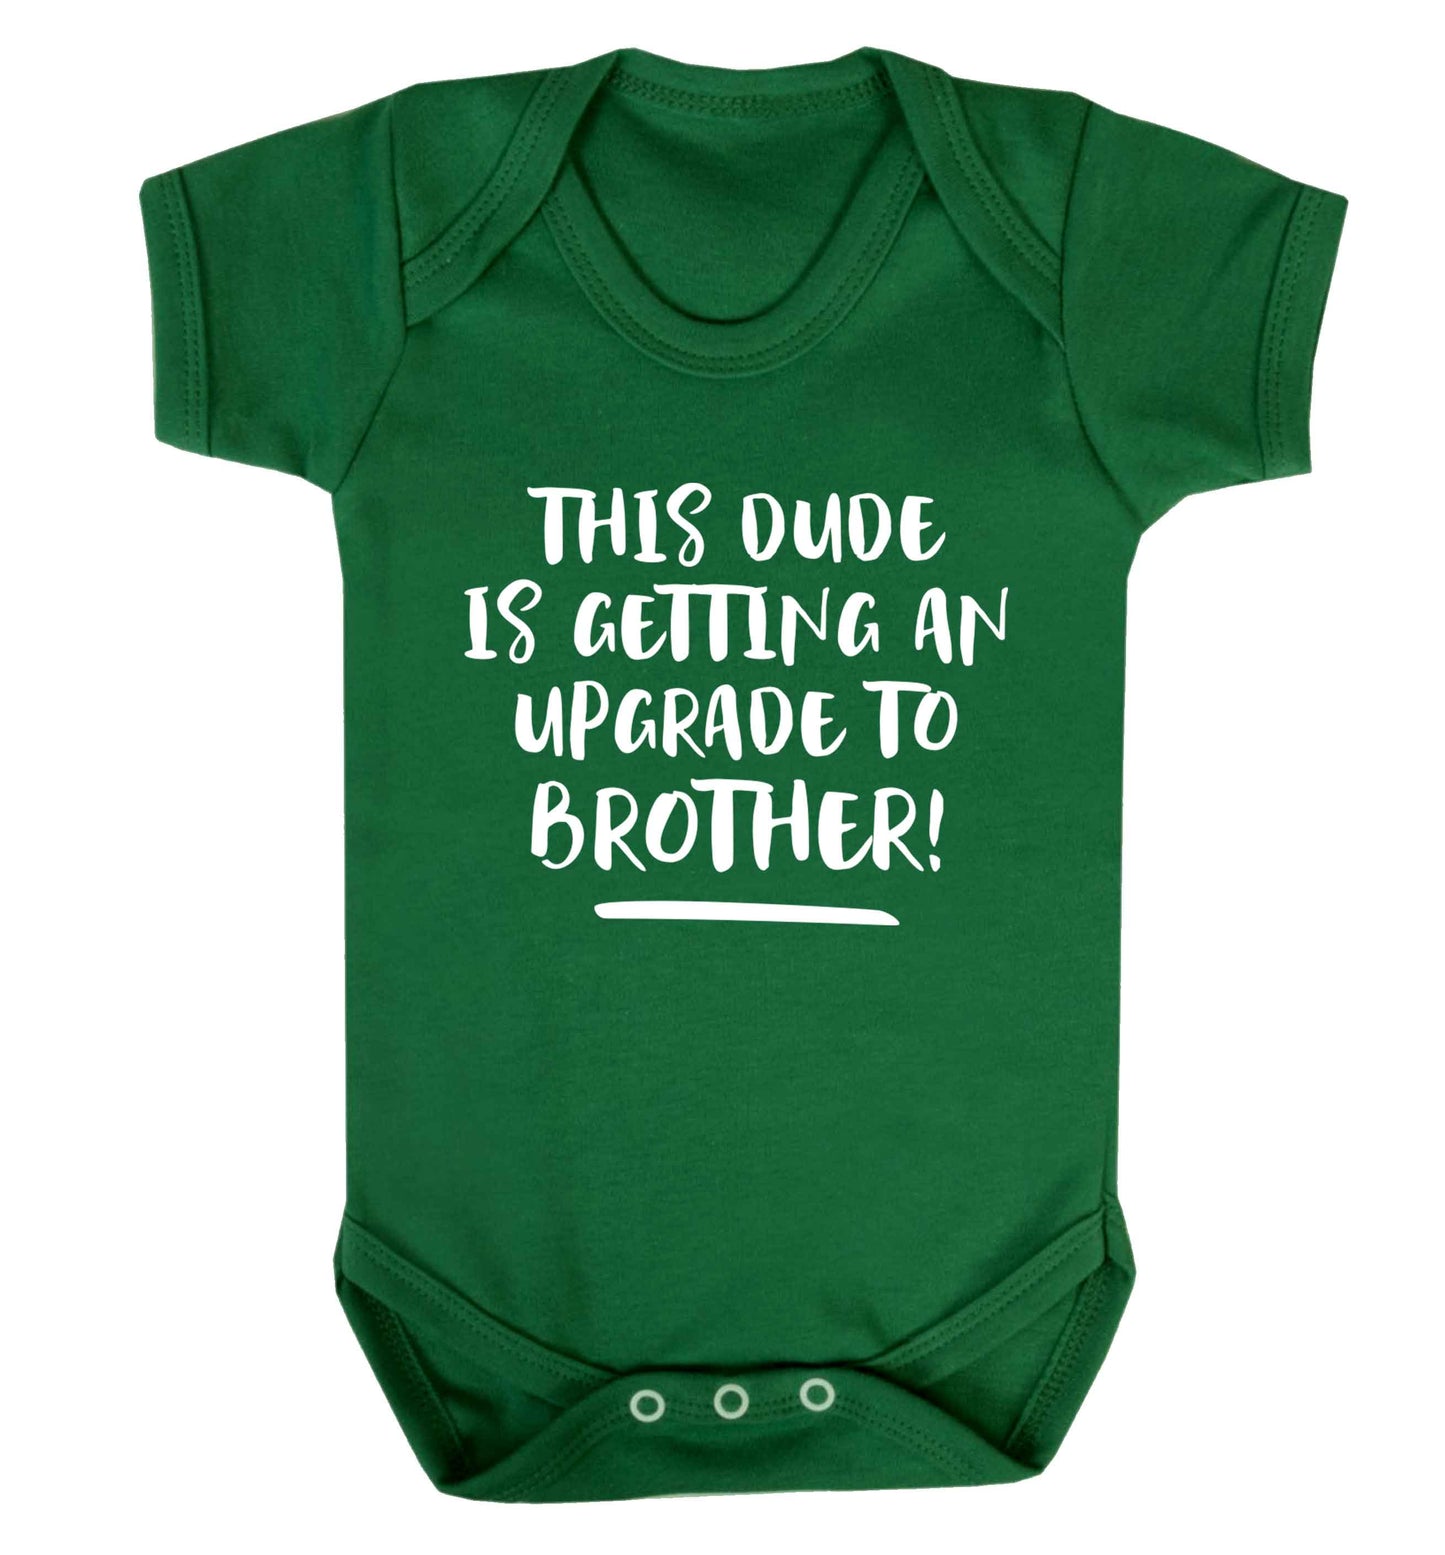 This dude is getting an upgrade to brother! Baby Vest green 18-24 months